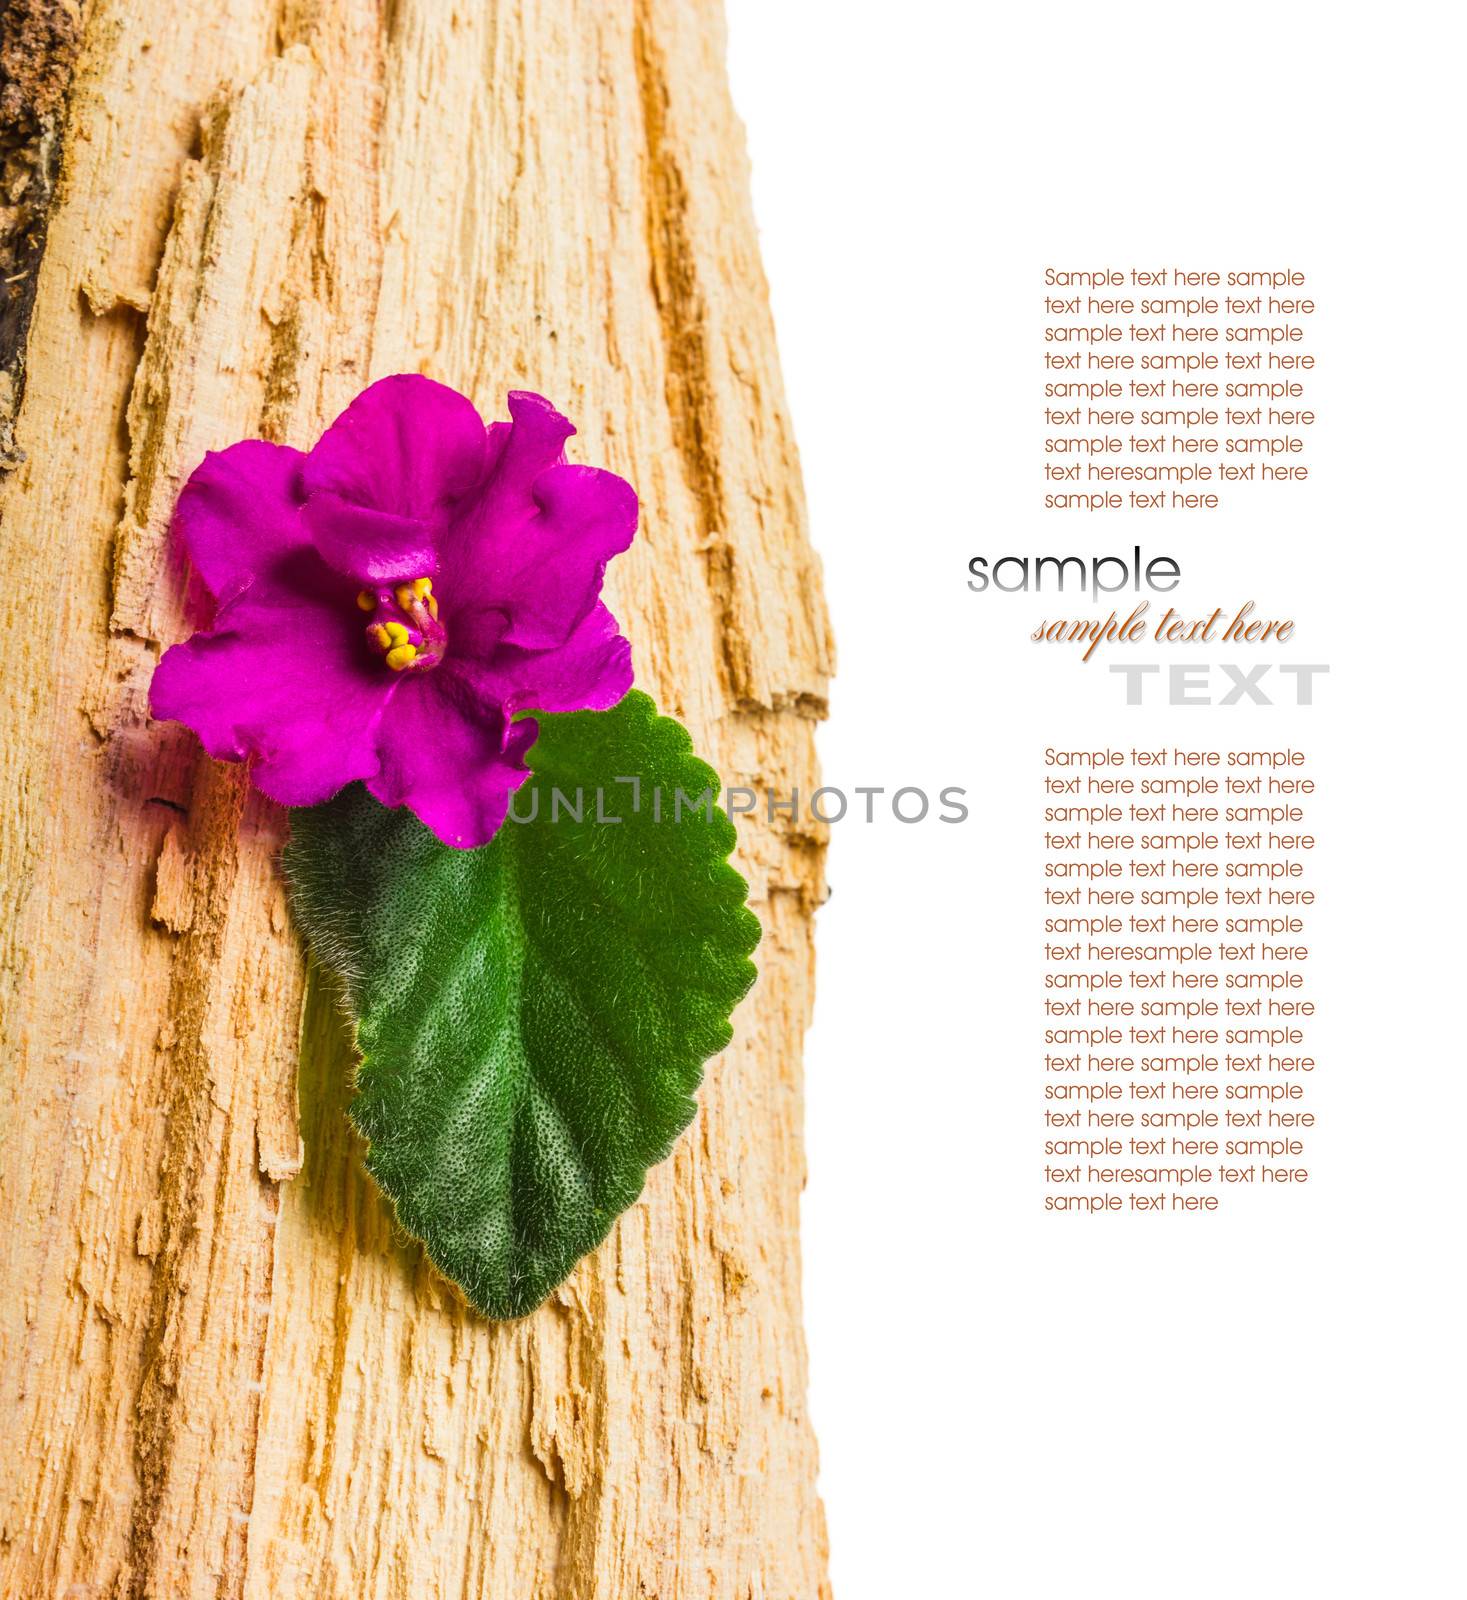 Flower with leaves on wooden background